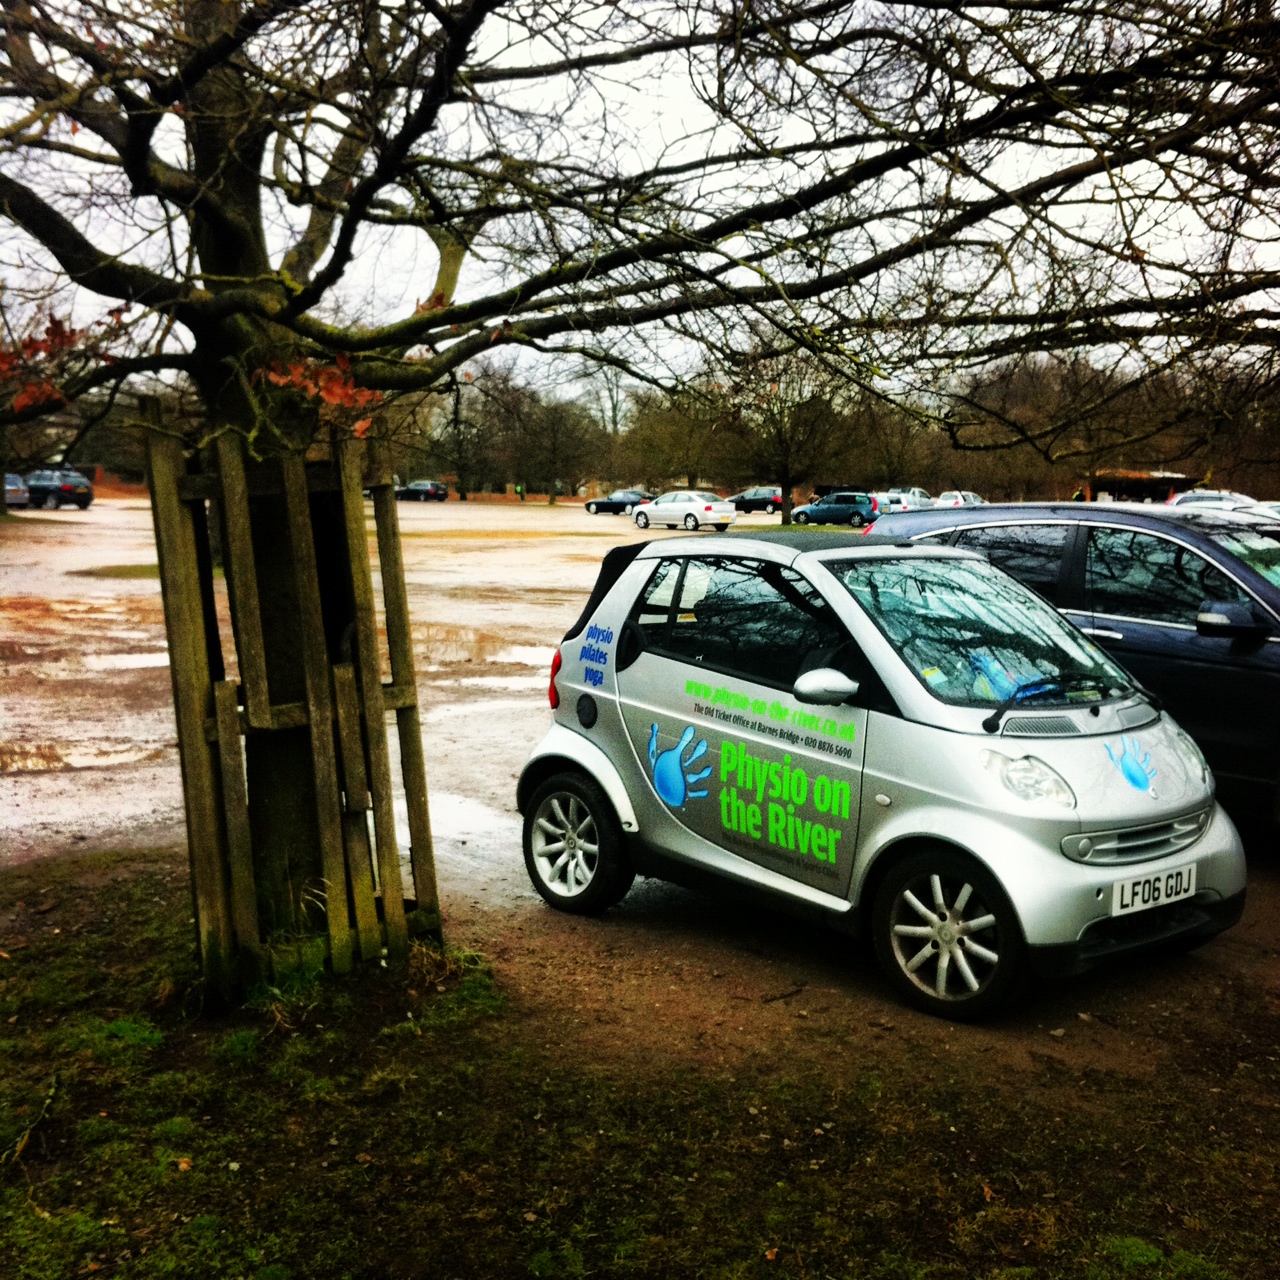 Physio on the River Branded Smart Car